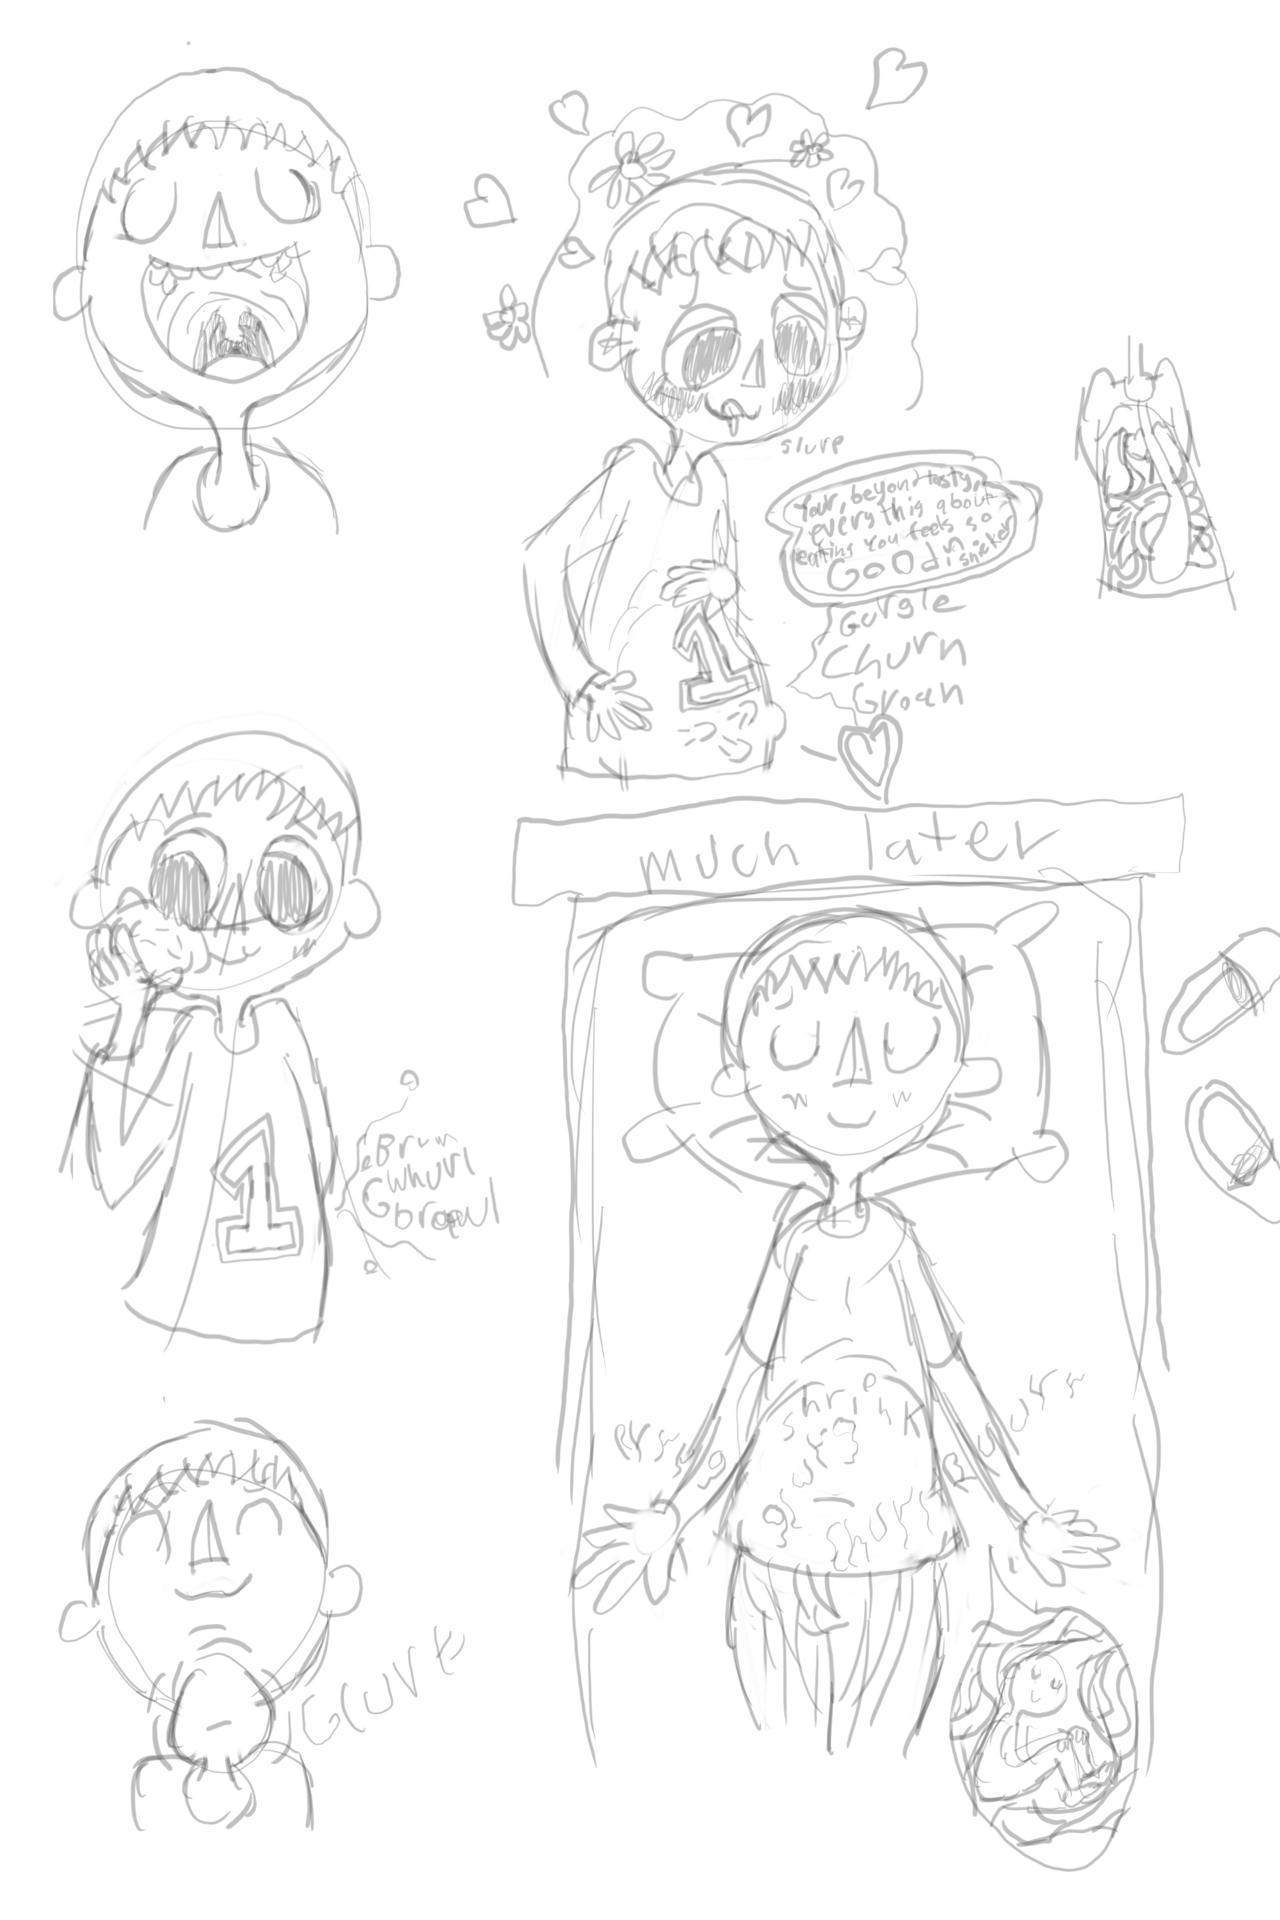 Air Conditioner Villager vore by SweetlyCreations on DeviantArt